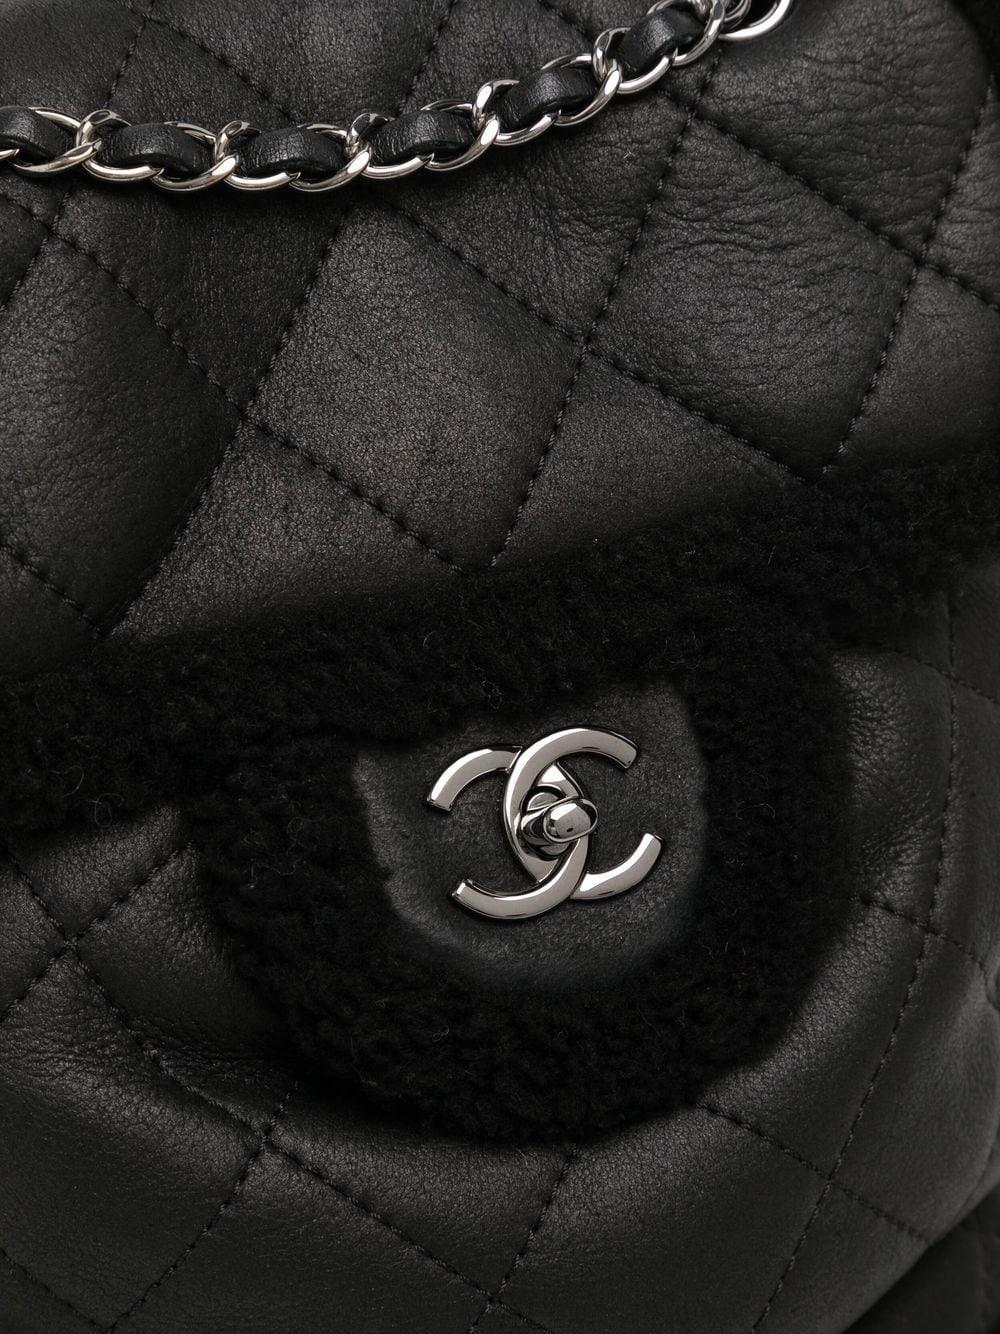 Introduced by Gabrielle Chanel to guarantee the quality and durability of leather bags, diamond quilting has become one of Chanel's signatures. That, combined with the leather and chain-link shoulder straps and the iconic interlocking CC turn-lock,